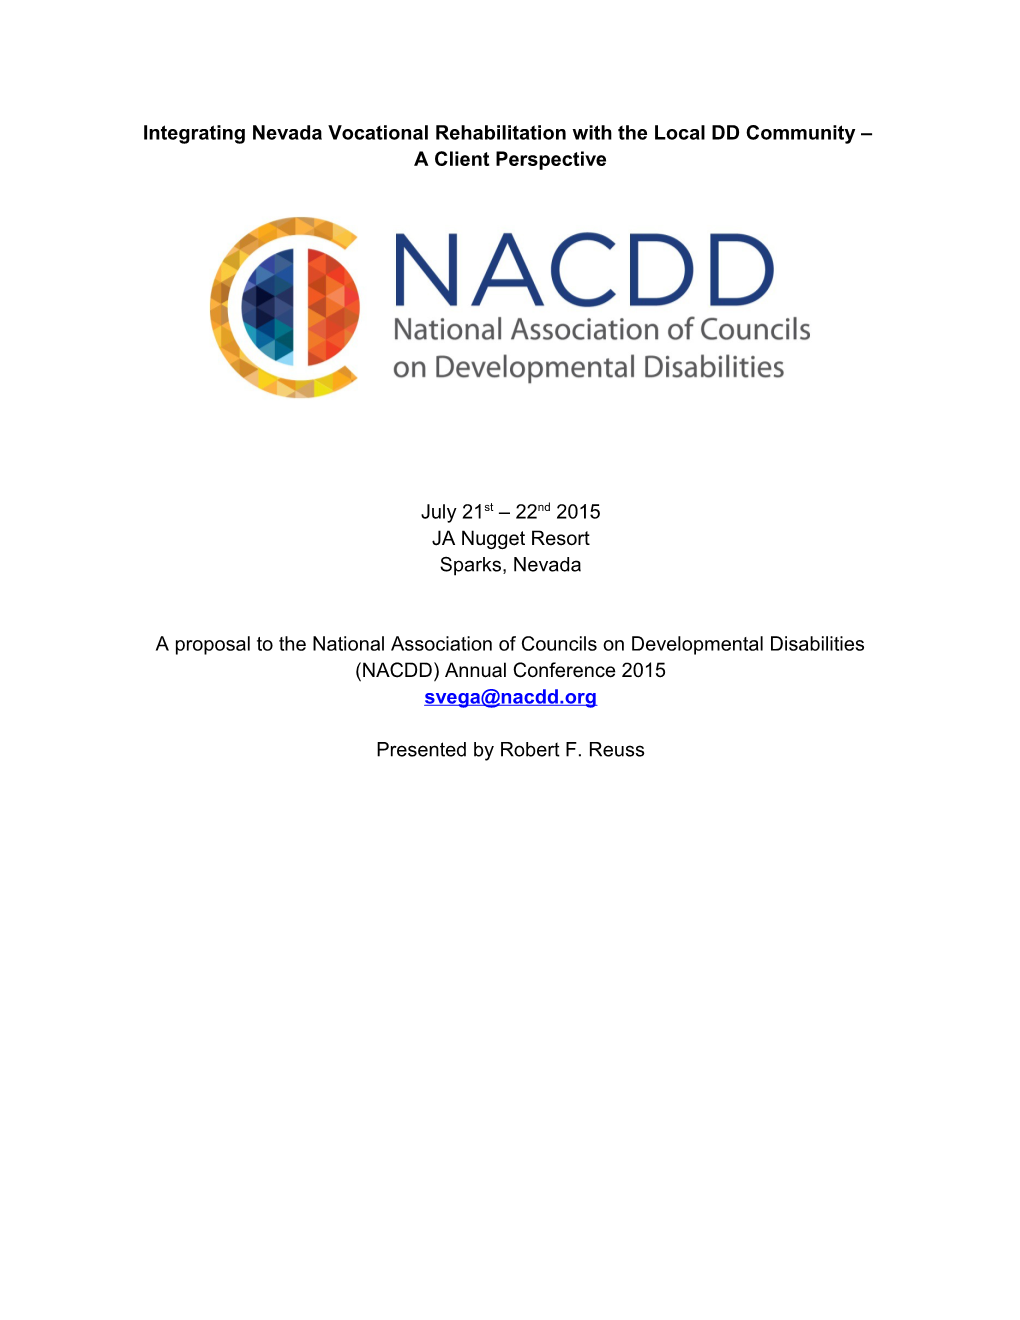 Integrating Nevada Vocational Rehabilitation with the Local DD Community